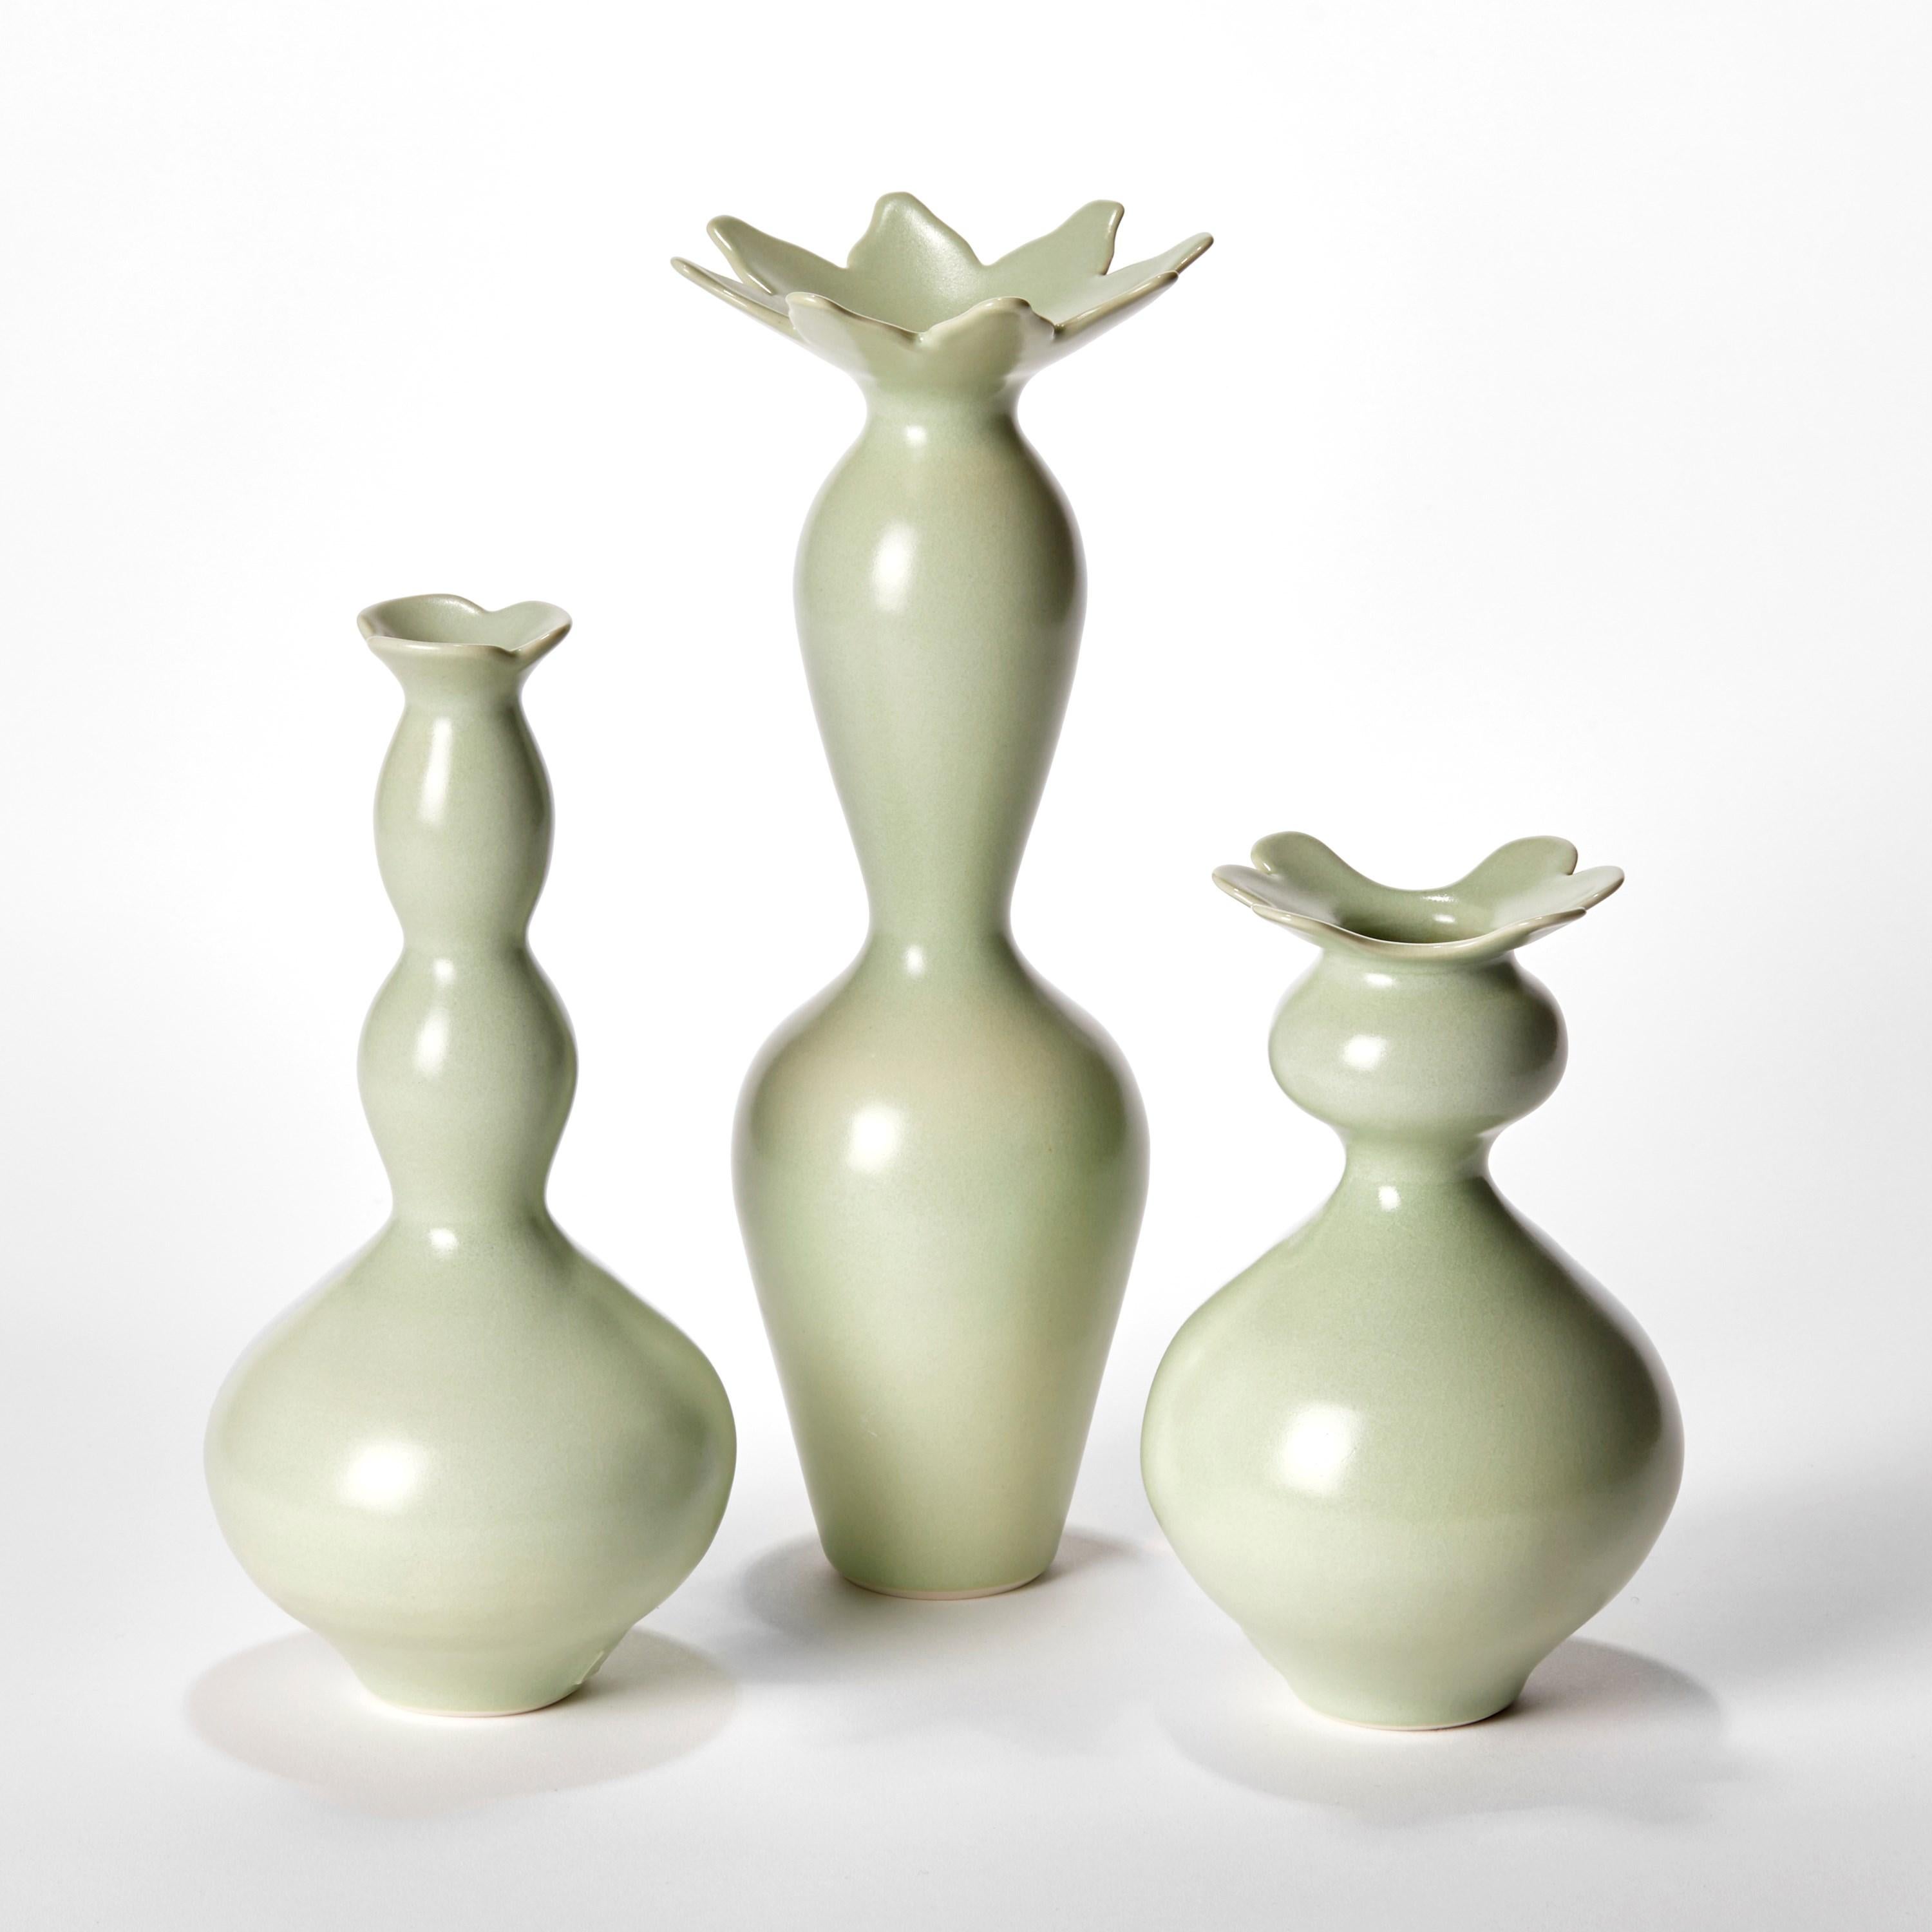 'Cactus Trio’ is a unique collection of porcelain sculptural vessels by the British artist, Vivienne Foley.

Left to right in the first image:

Apple Green Bobbin Cactus  H 25 cm W 11.5 cm D 11.5 cm 
Apple Green Tall Cactus  H 31.5 cm W 12 cm D 12